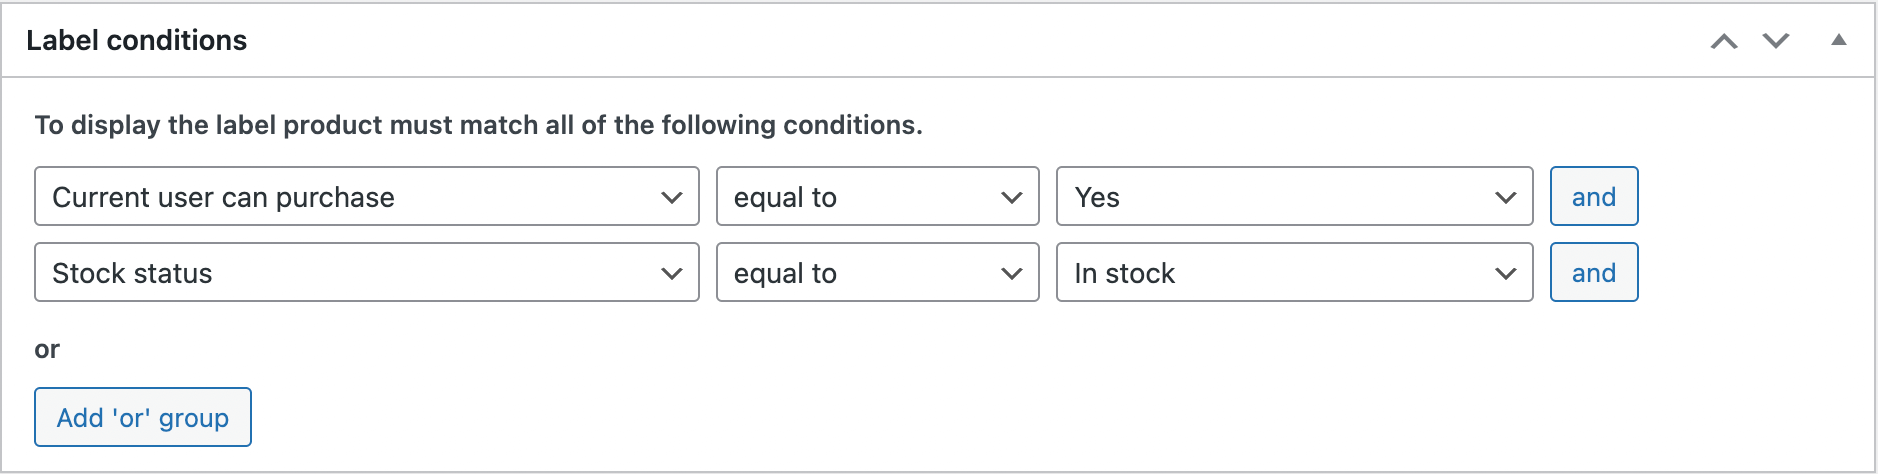 Label display conditions option